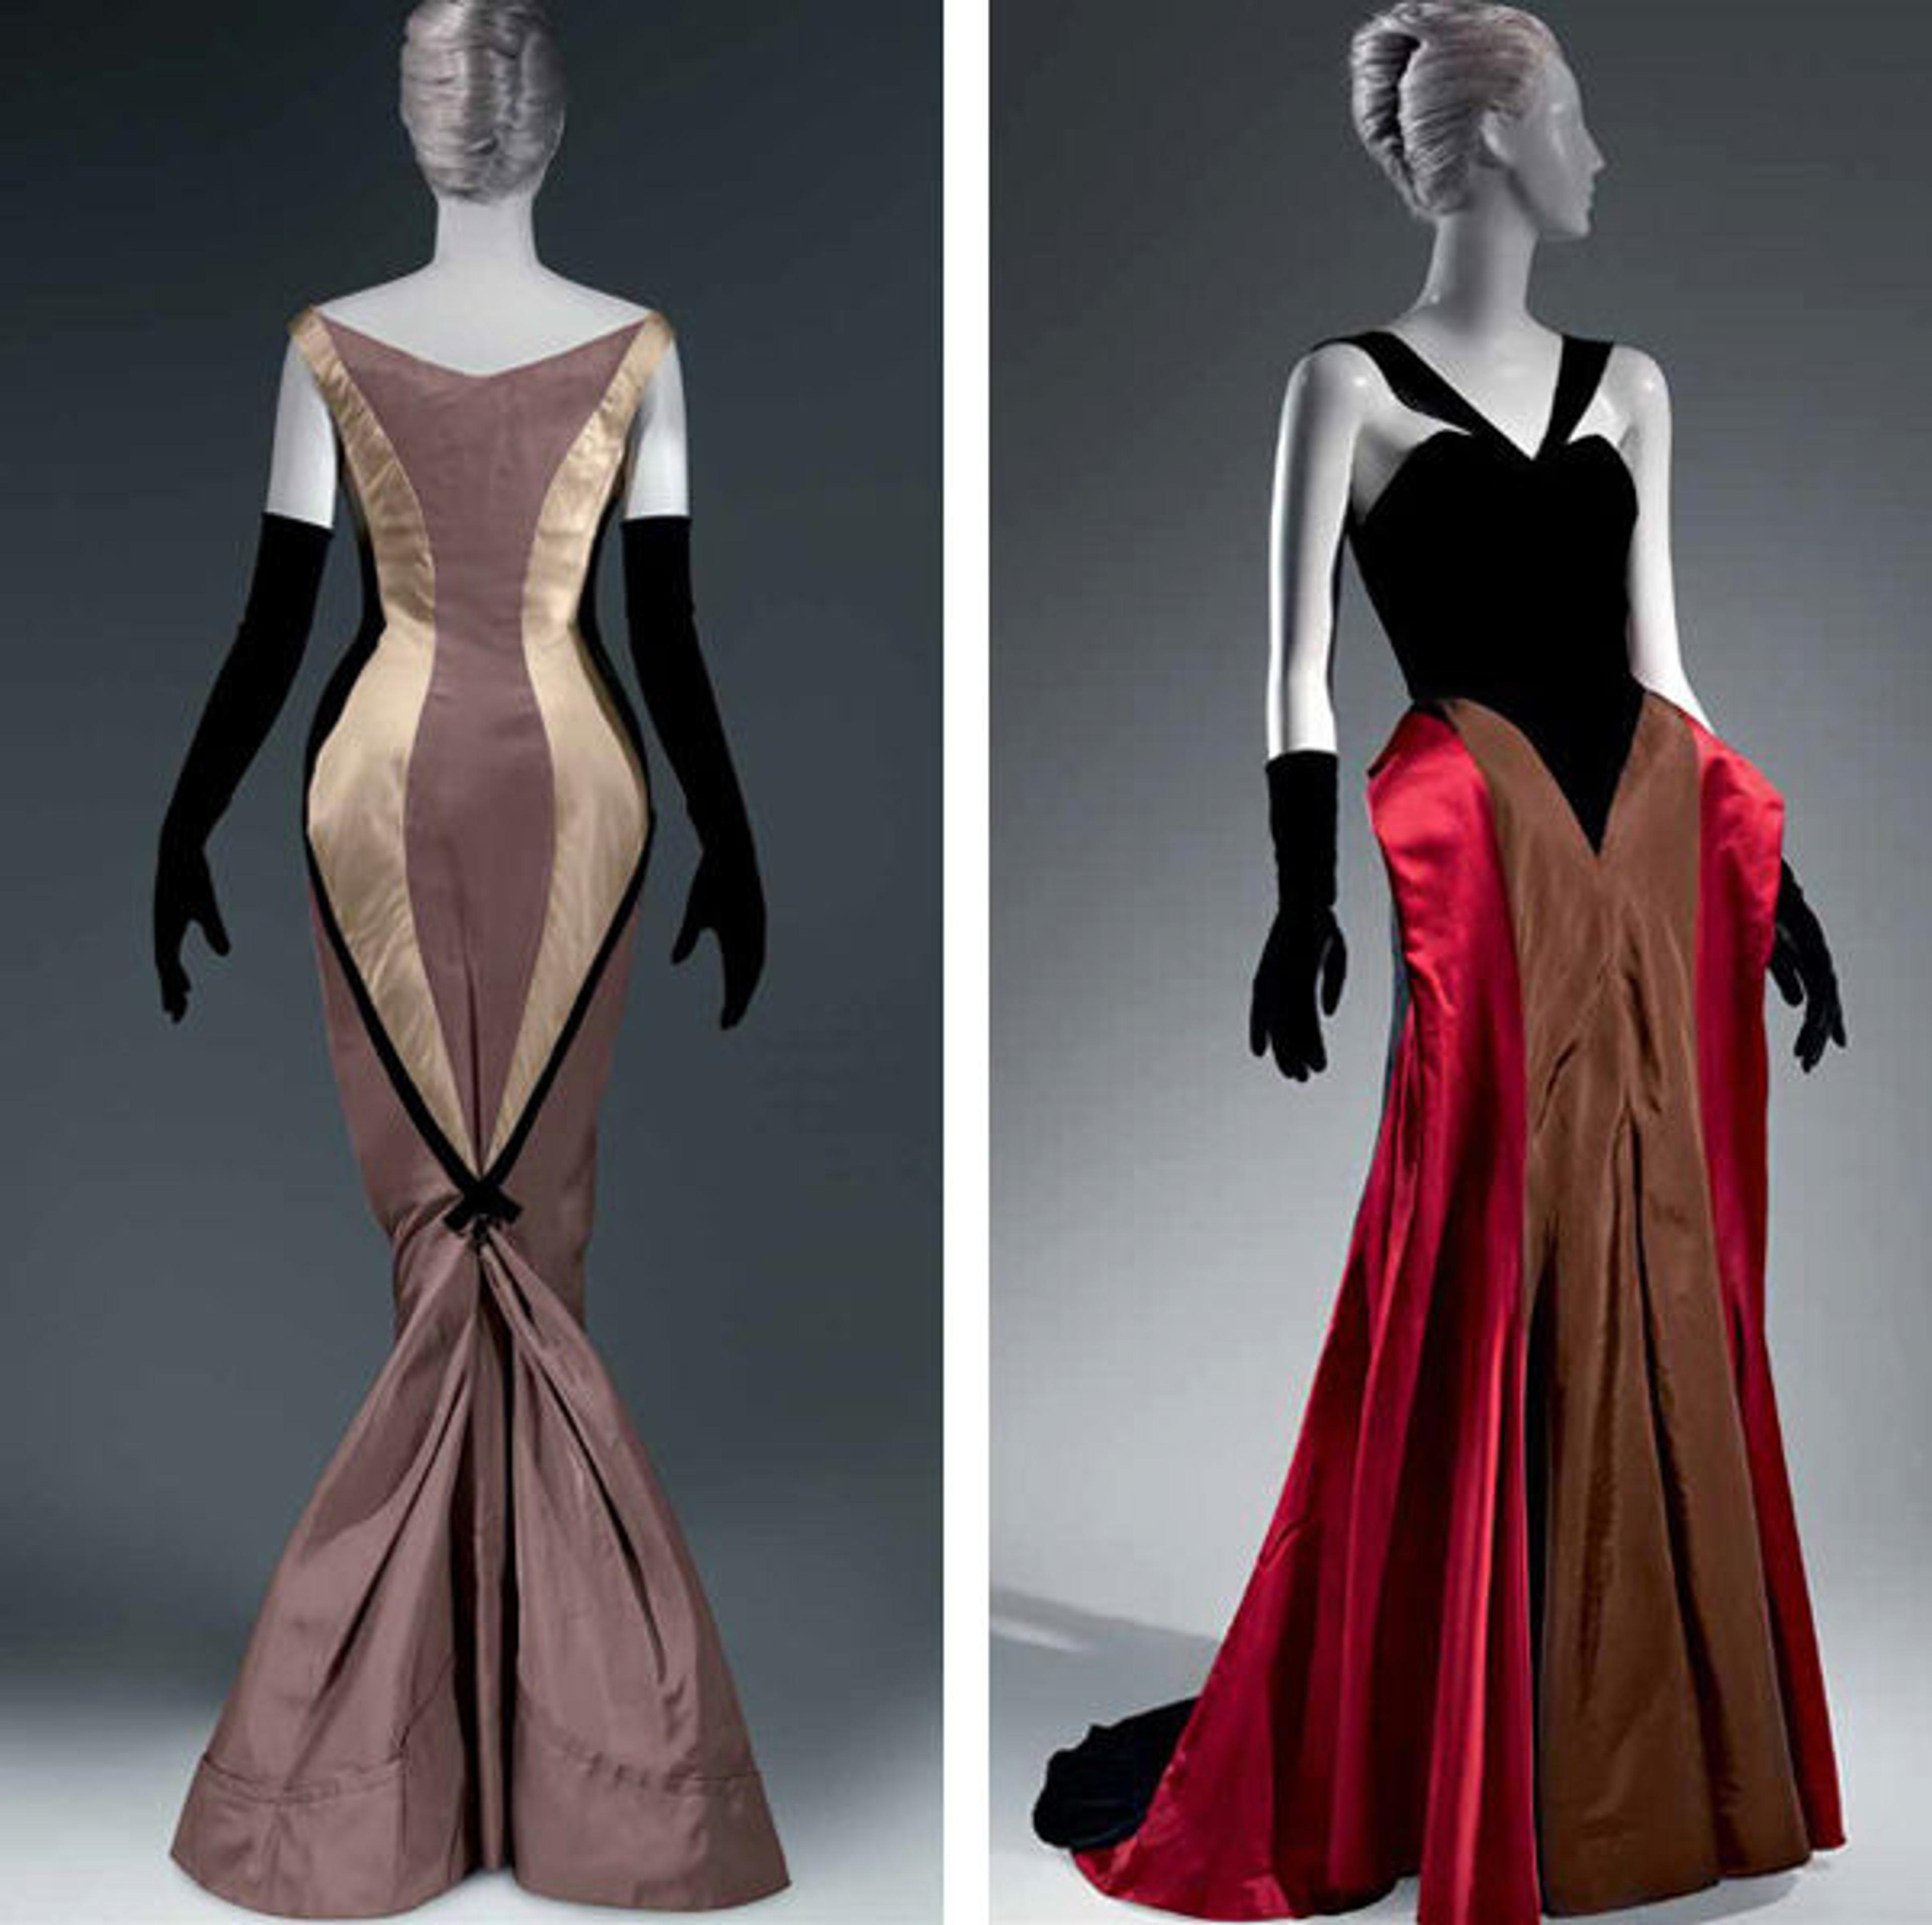 Charles James (American, born Great Britain, 1906–1978). Left: "Diamond" Evening Dress, 1957; Right: Ball Gown, 1946